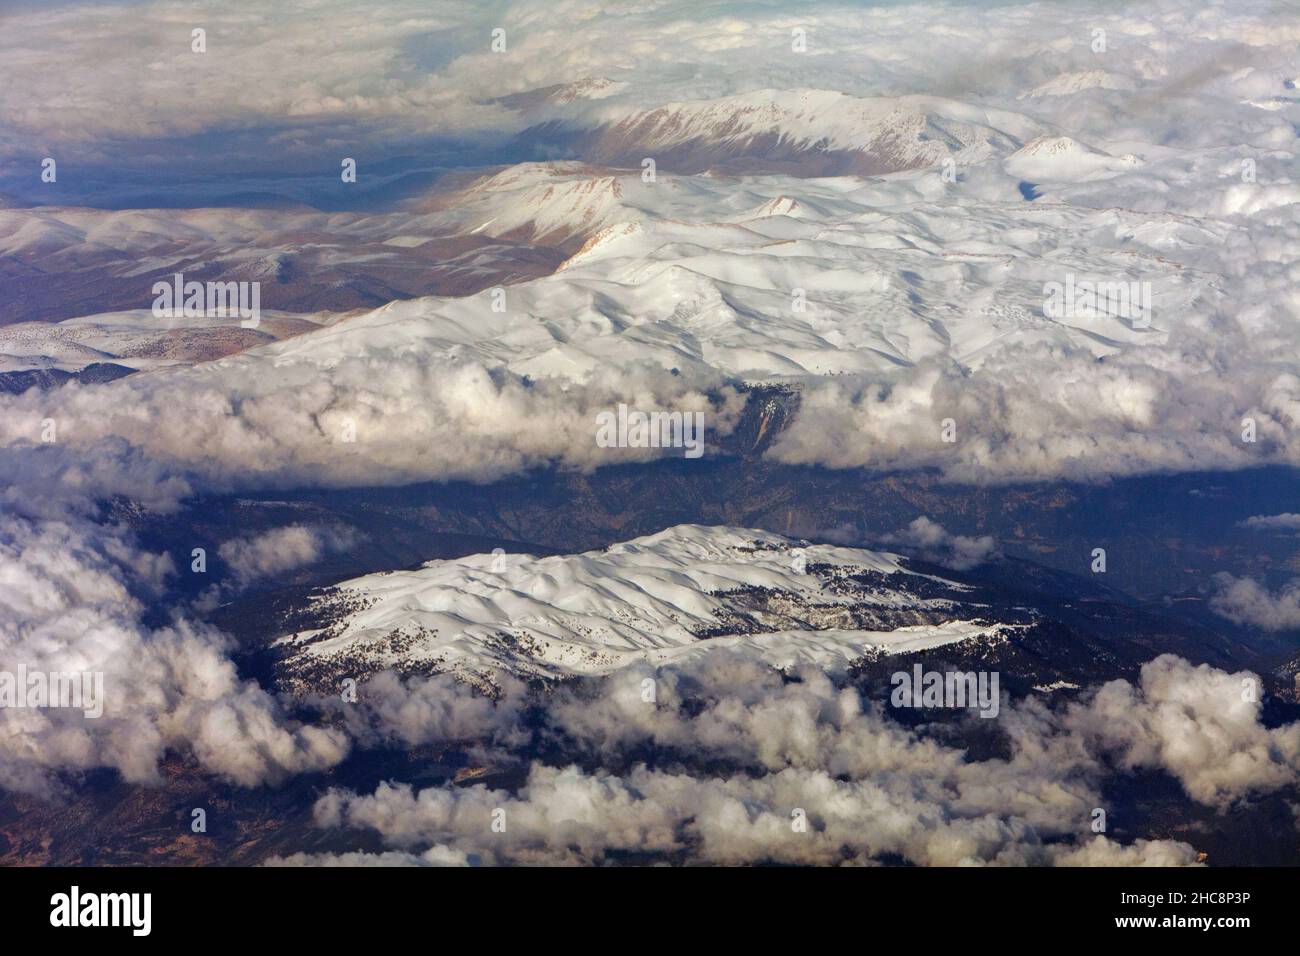 Greece Mountain range, the Pindus, north Greece, covered in winter snow, viewed from a passenger plane, Europe Stock Photo